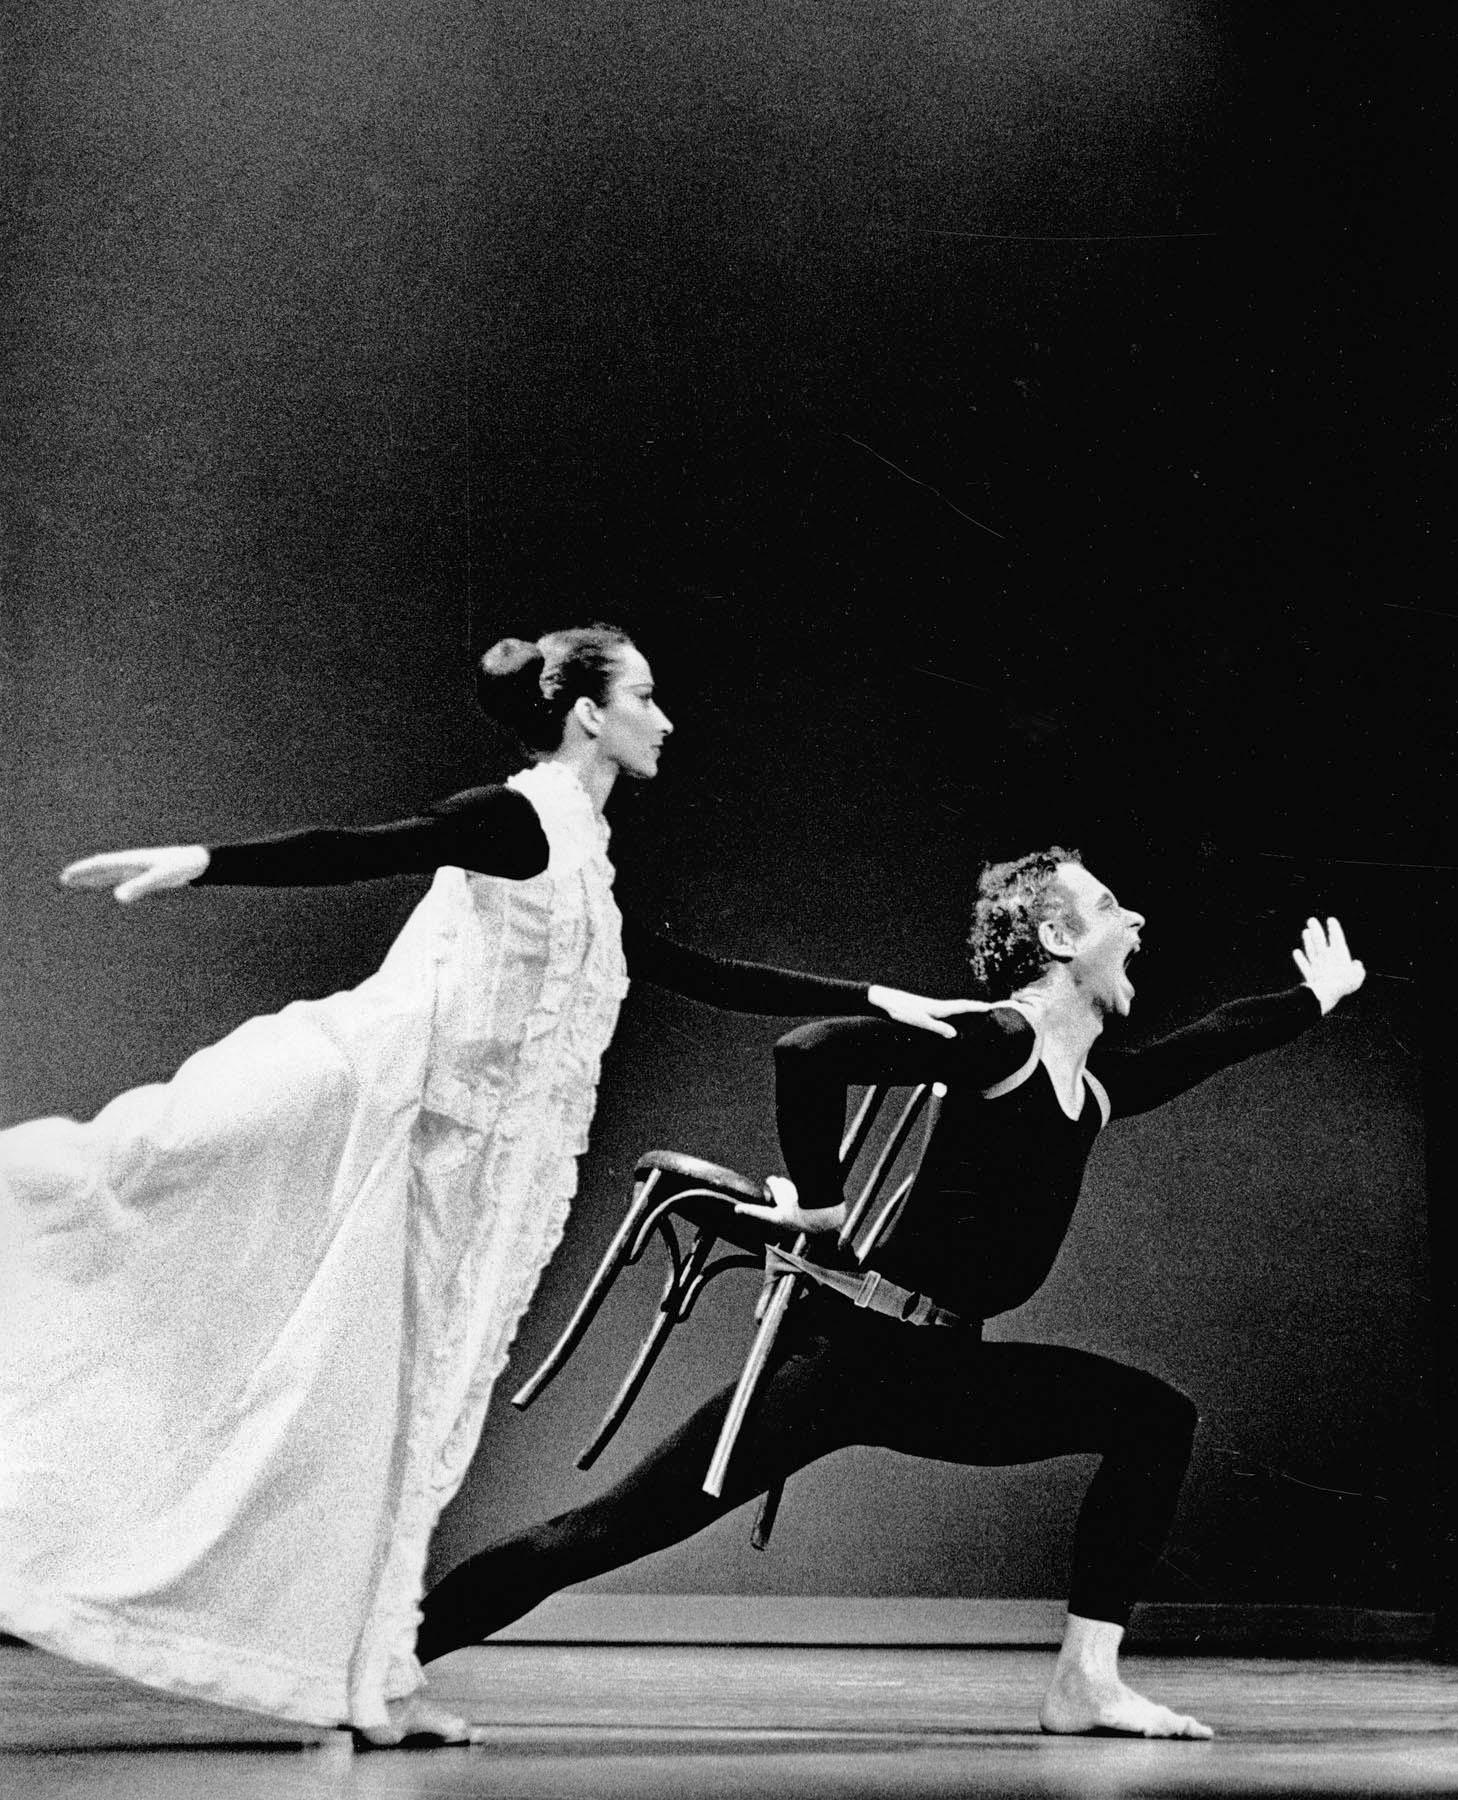 Jack Mitchell Black and White Photograph - Merce Cunningham and Carolyn Brown performing 'Antic Meet'